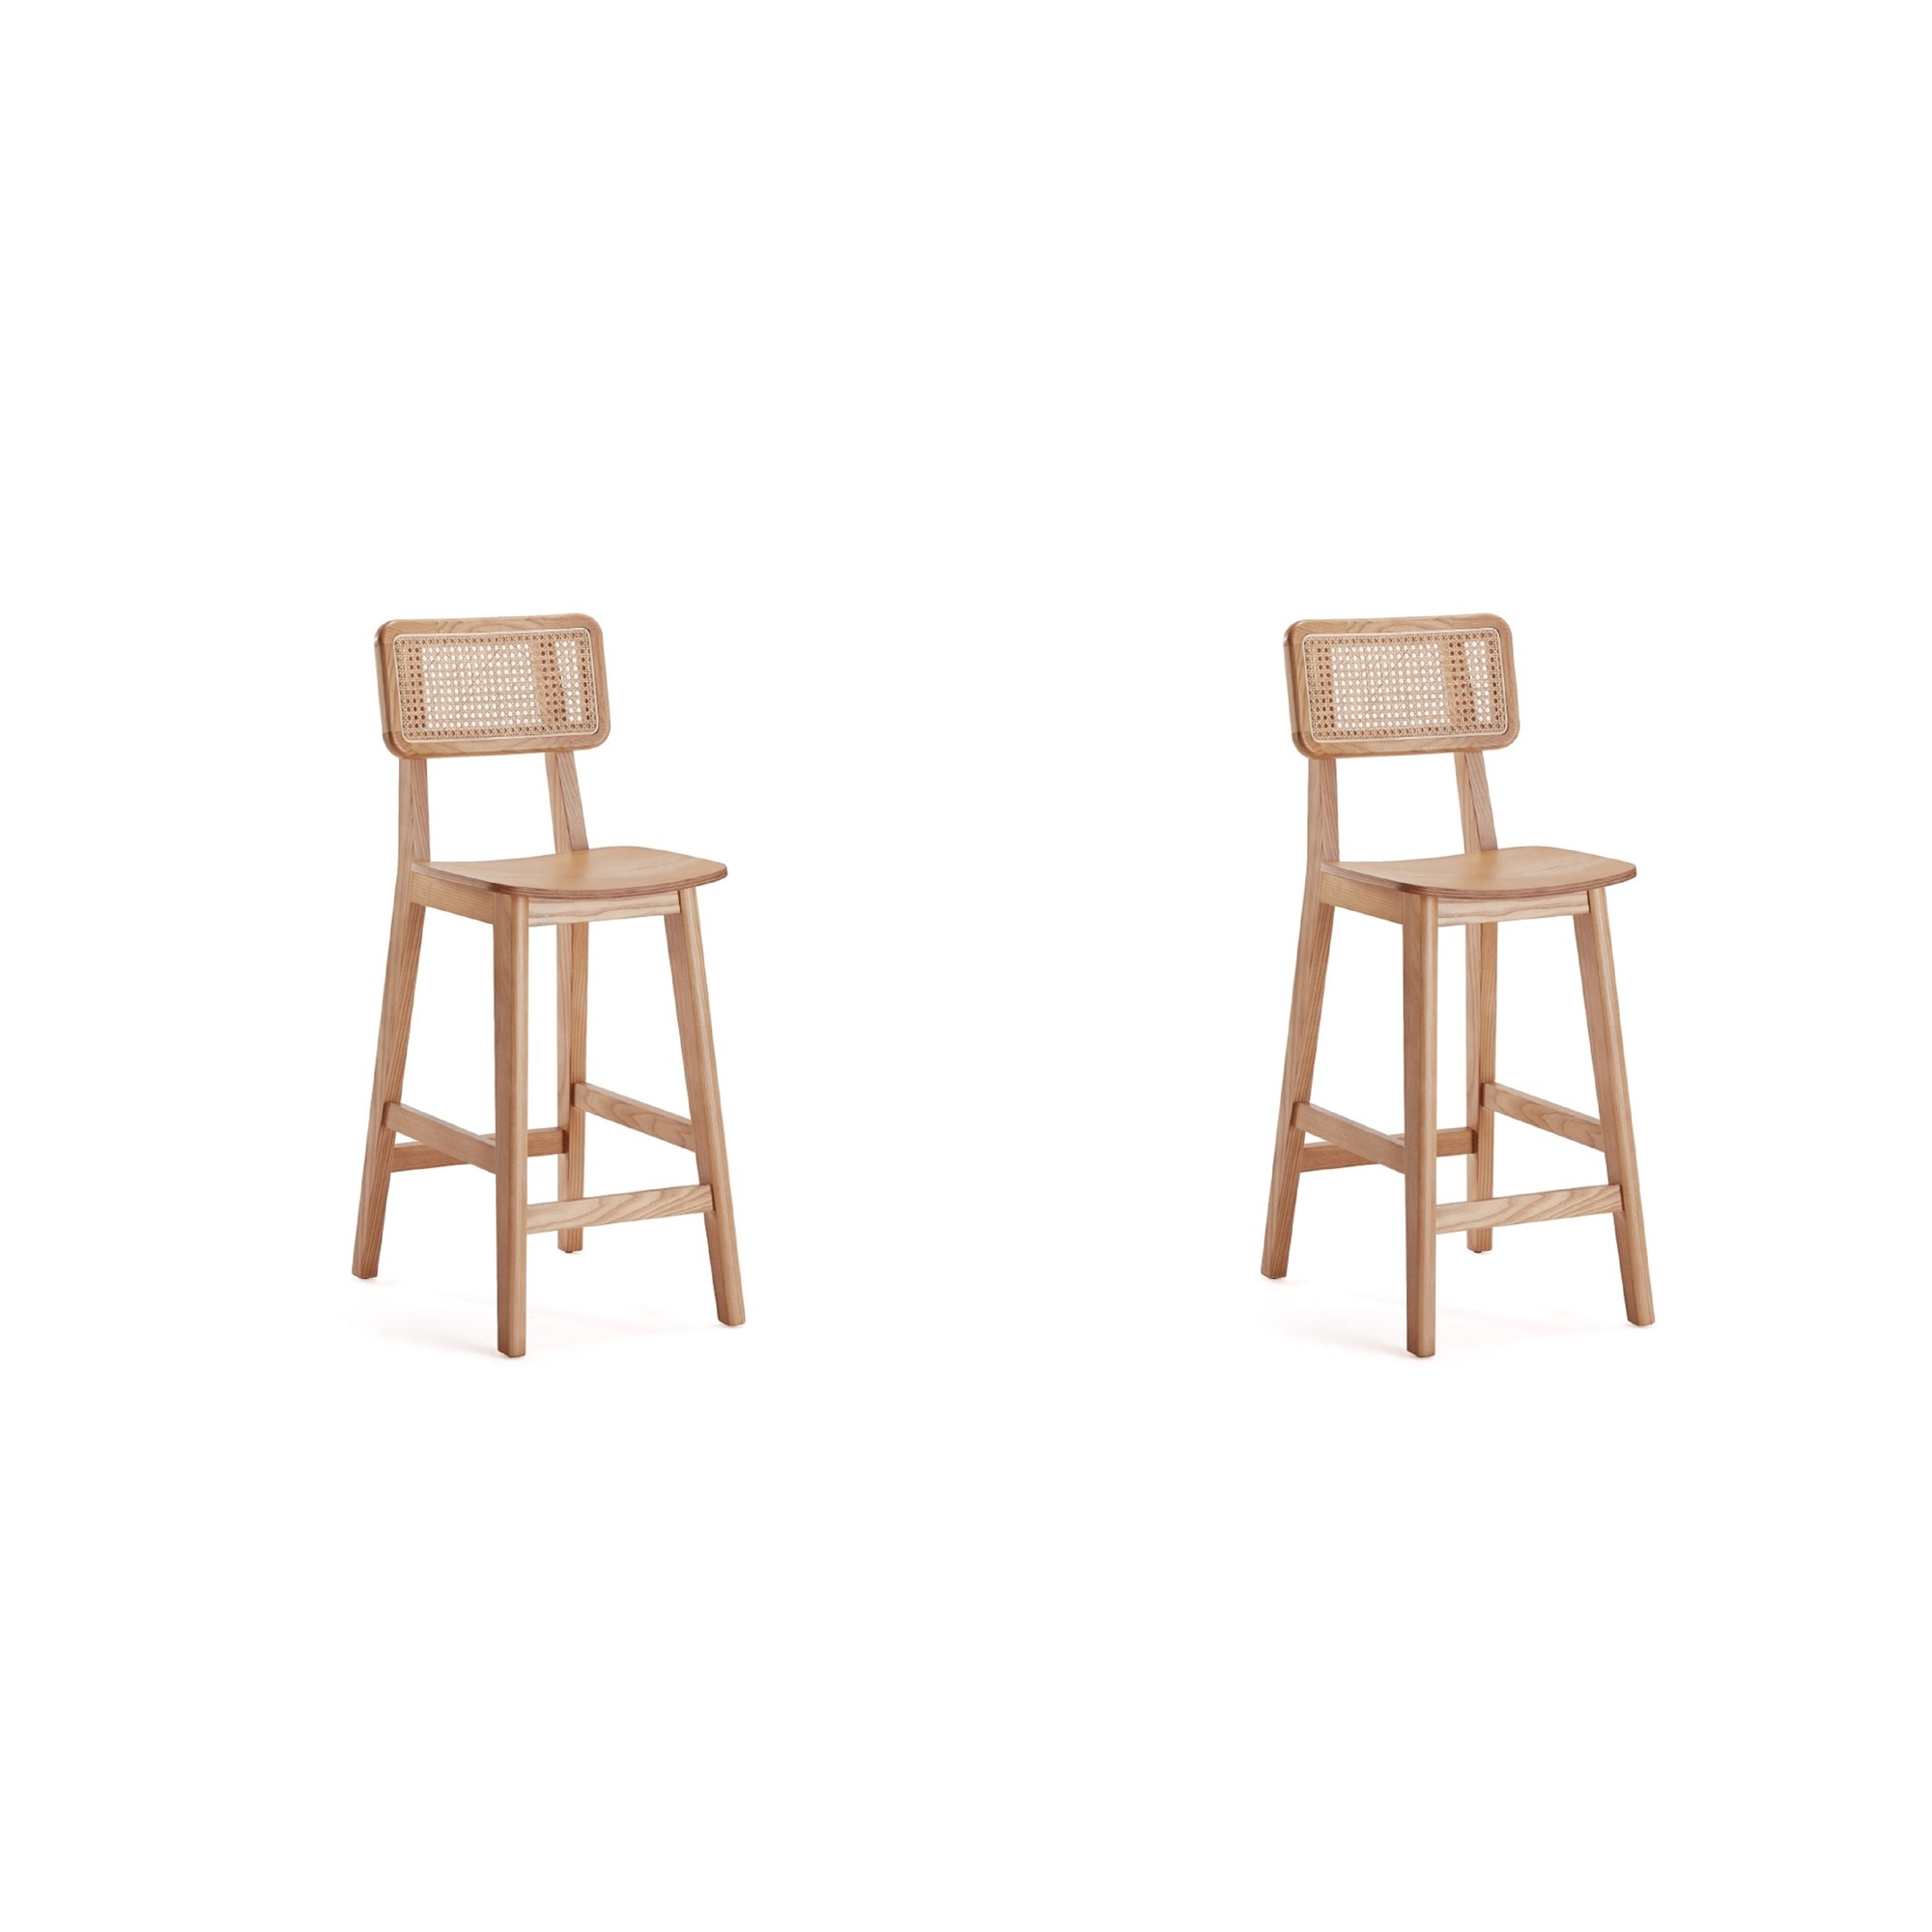 Manhattan Comfort, Versailles Counter Stool in Nature Cane - Set of 2 Primary Color Natural, Included (qty.) 2 Model 2-CSCA01